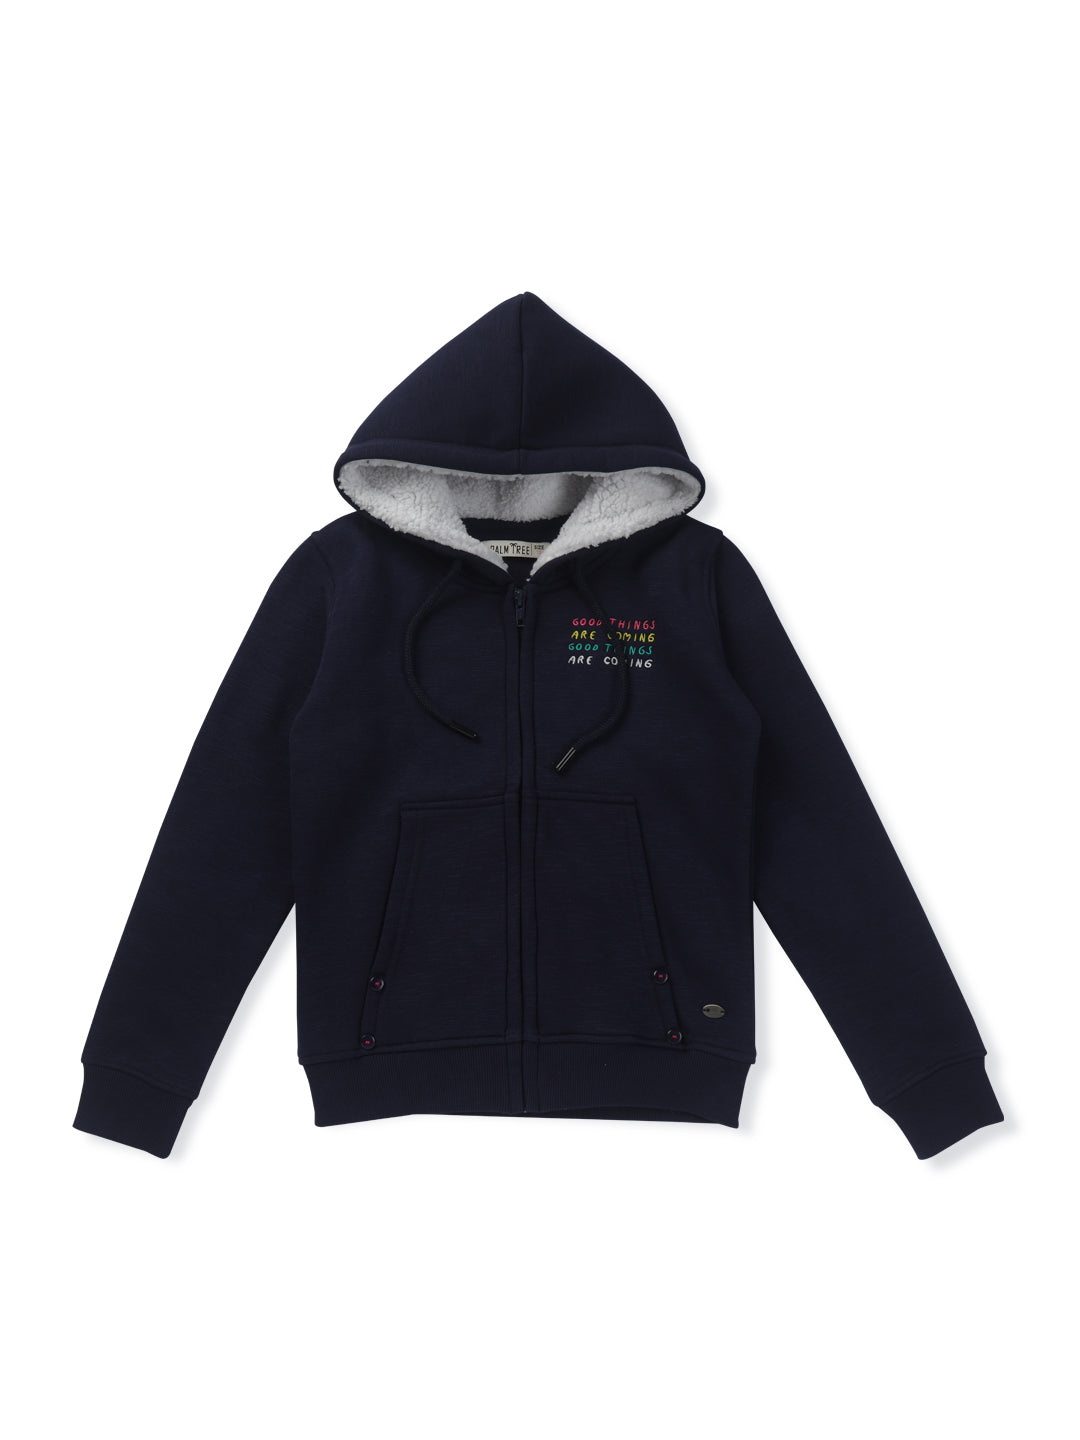 Girls Navy Blue Embroidered Woven Knits Jacket